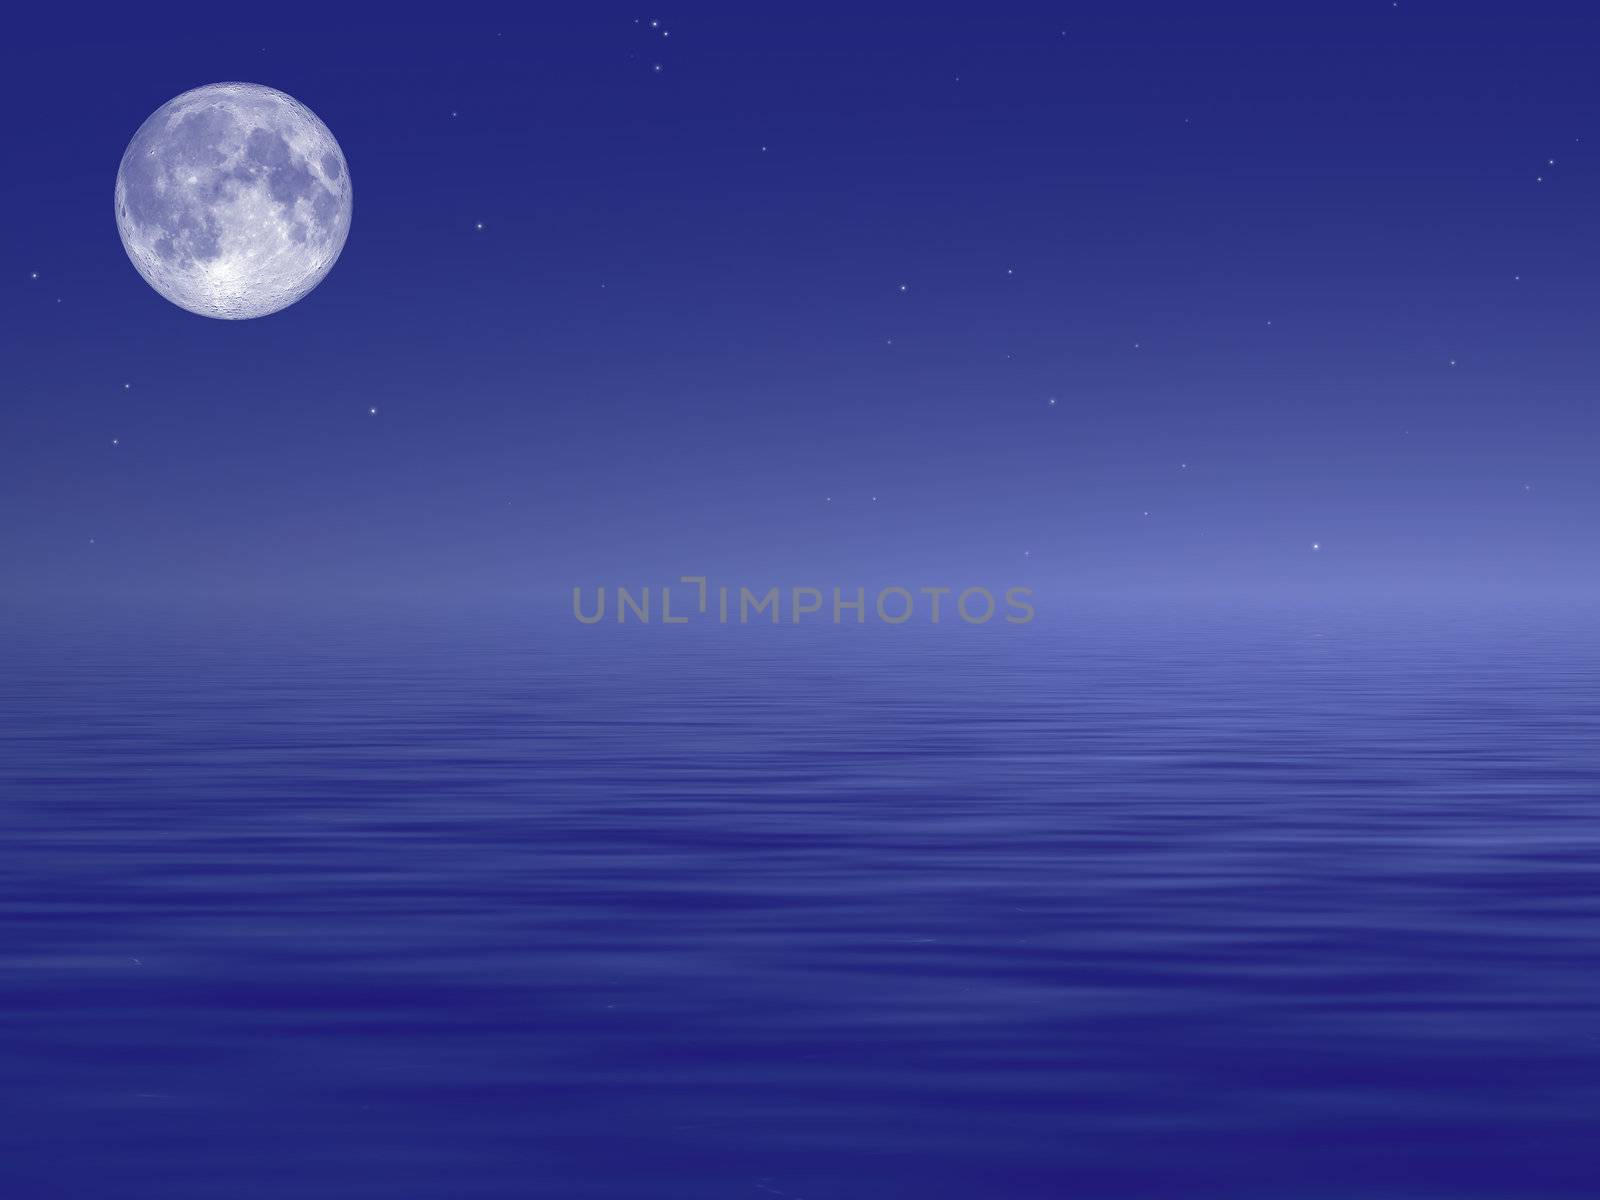 Full Moon over calm ocean waters with copy space